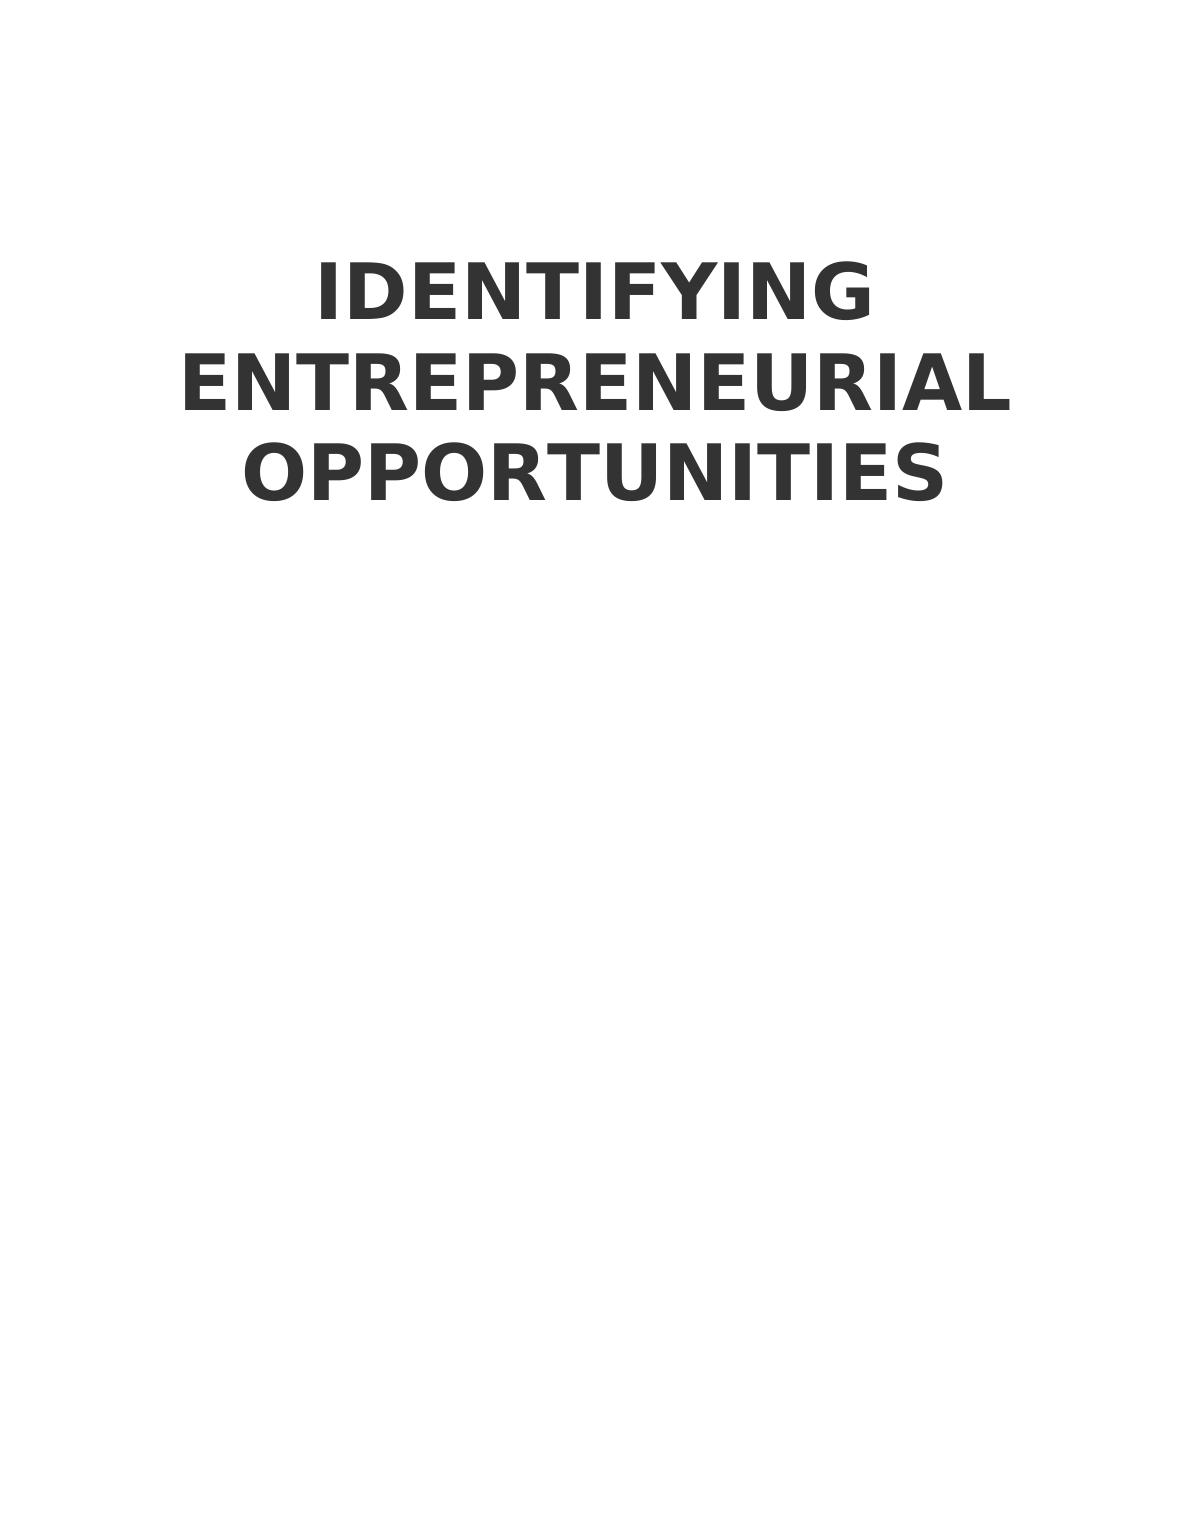 Identifying Entrepreneurial Opportunities Solution Assignment_1